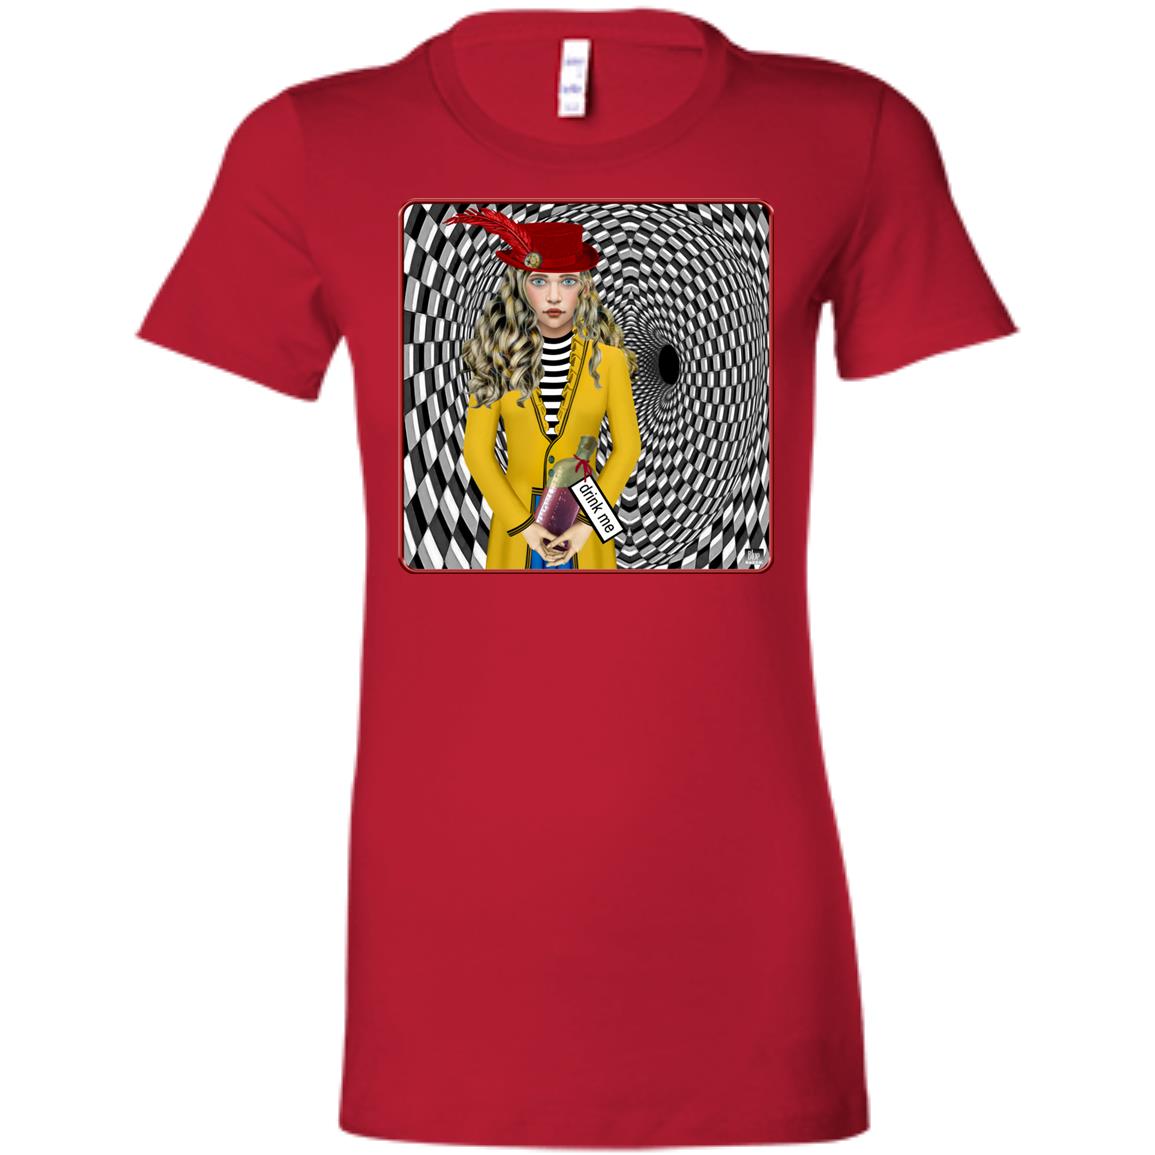 portrait of alice - Women's Fitted T-Shirt